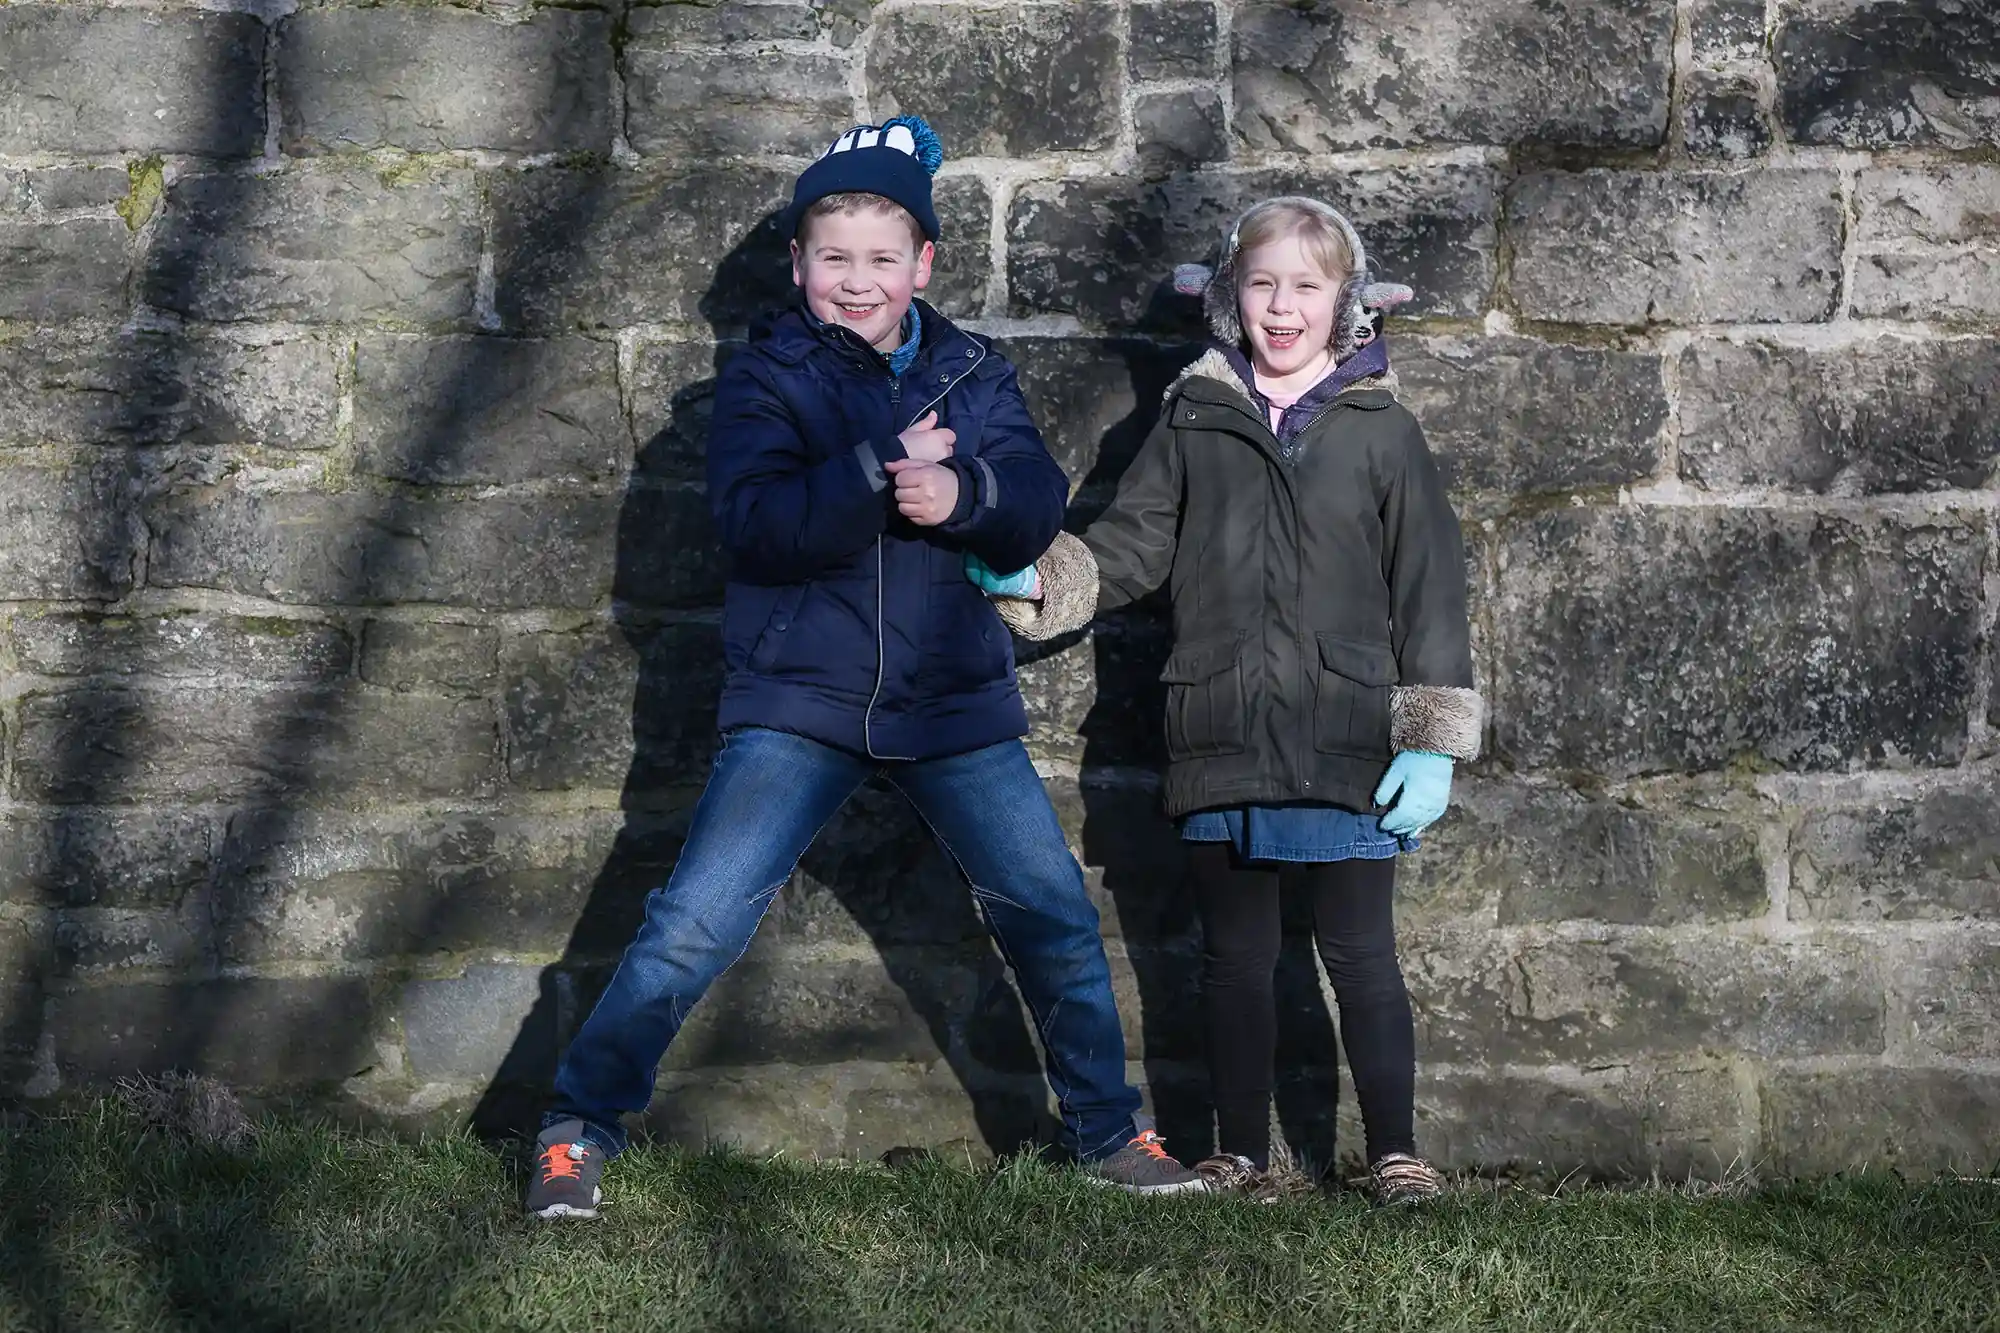 Two children stand in front of a stone wall, one giving a thumbs up and the other smiling. Both wear winter jackets and gloves, and shadows from a tree are cast on the wall behind them.